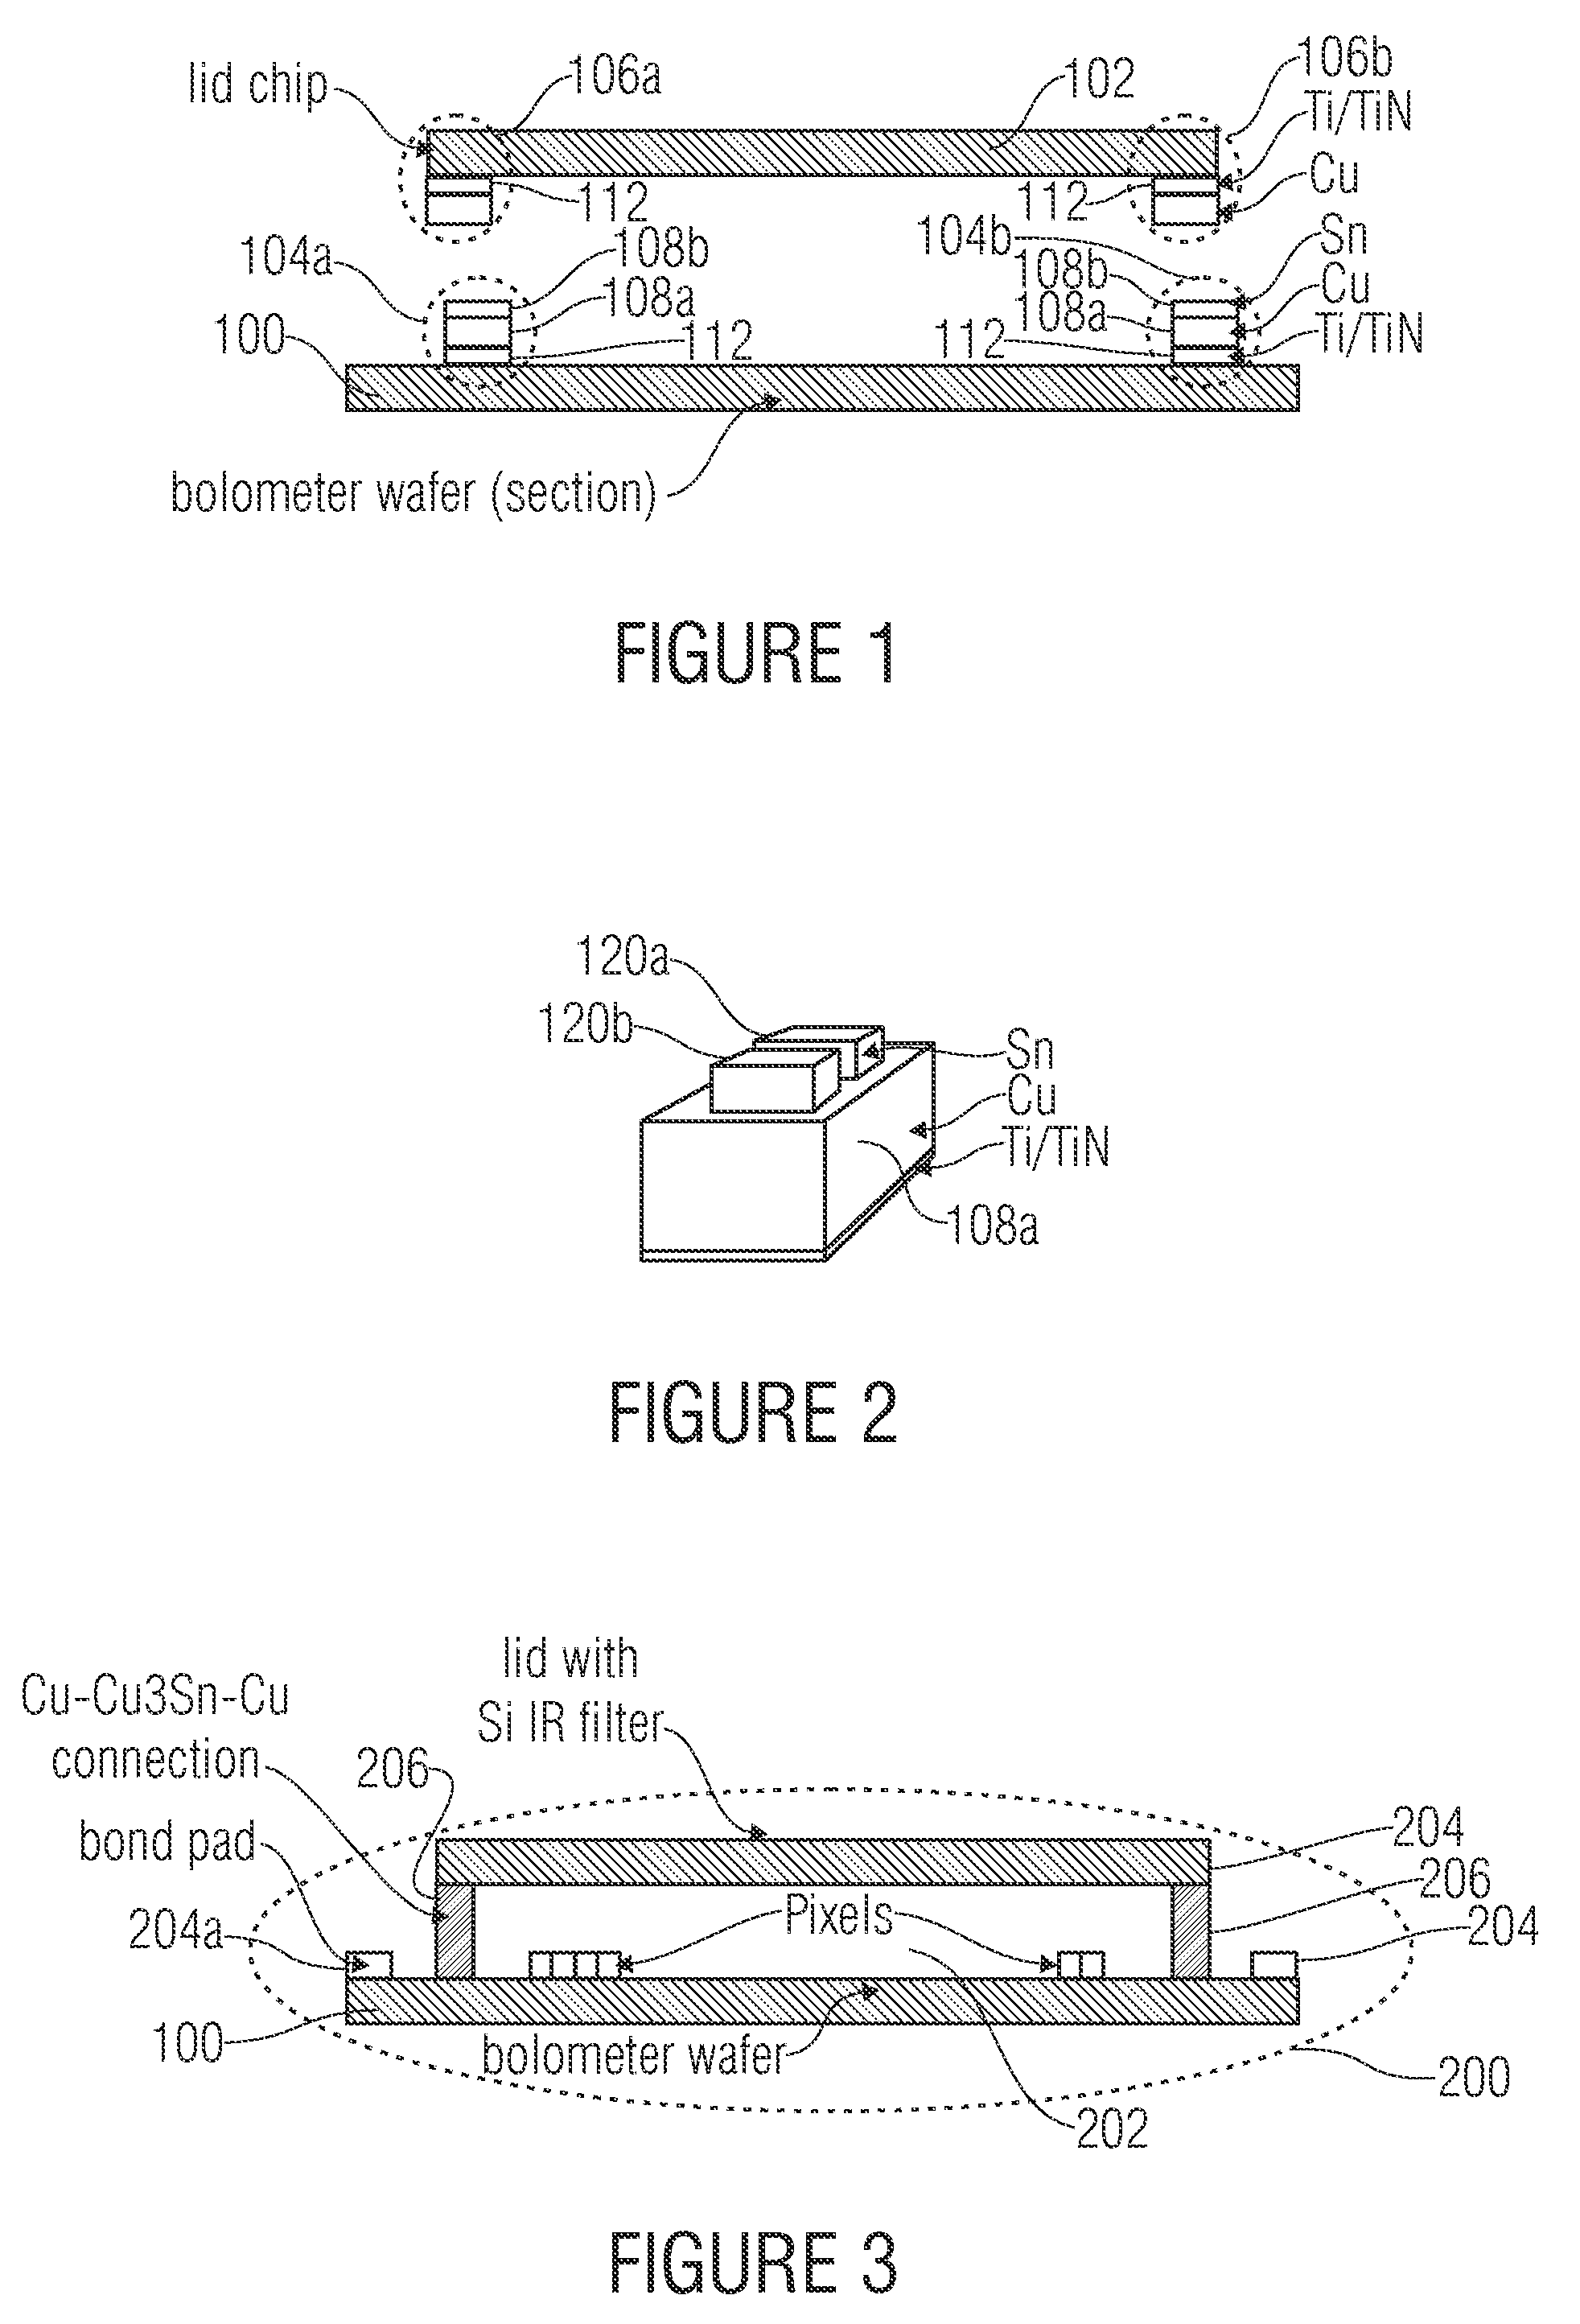 Package comprising an electrical circuit